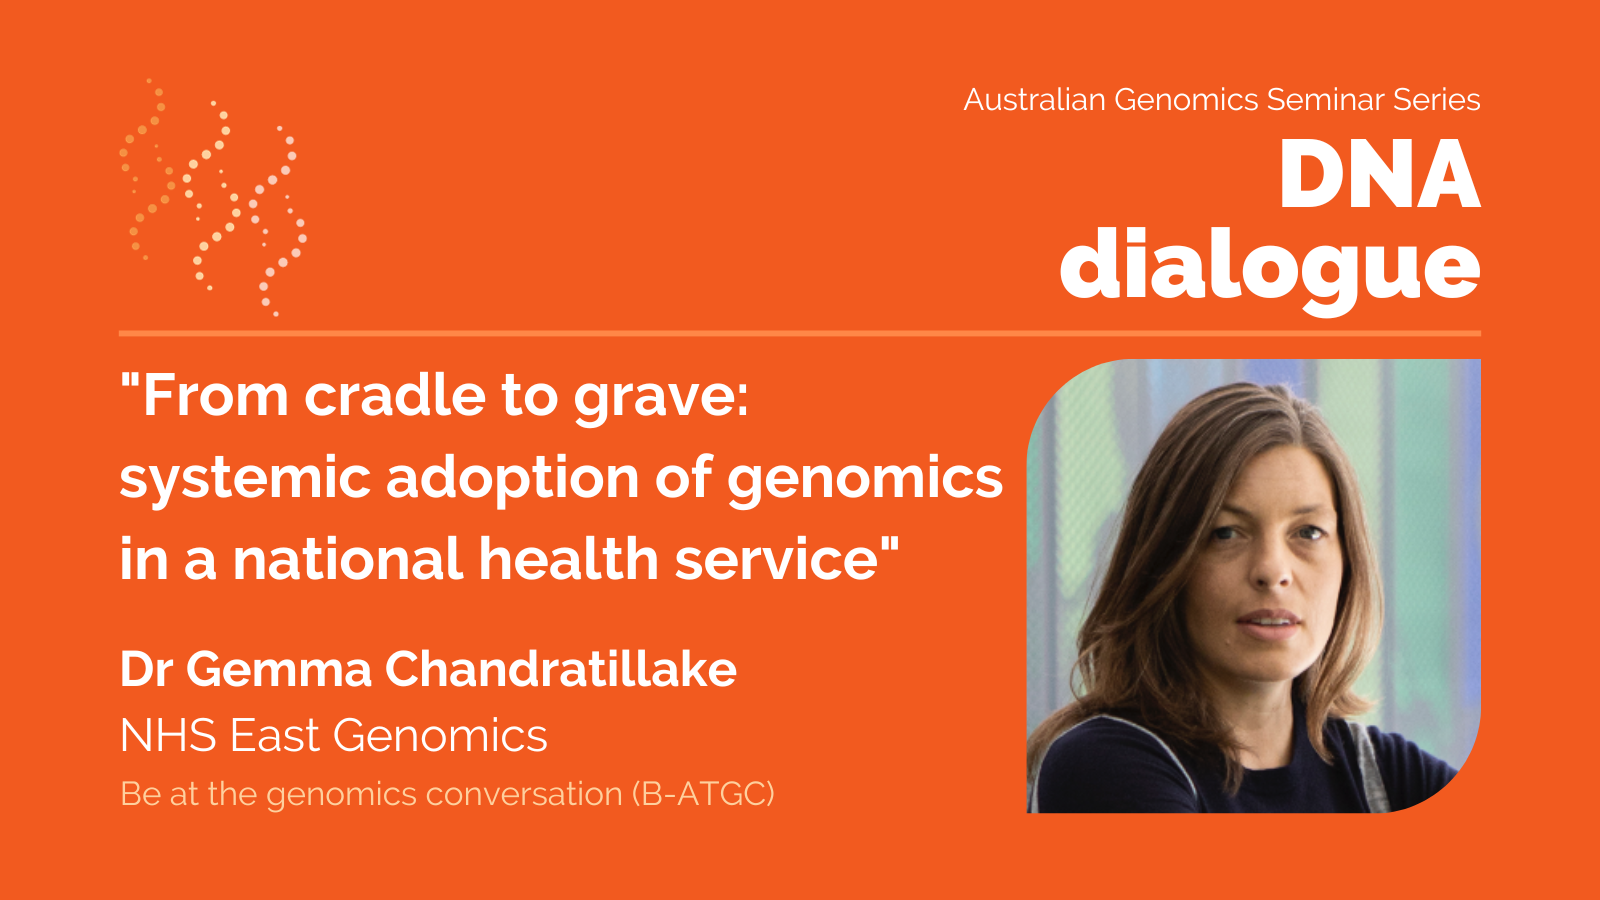 DNA dialogue seminar on 26 October 2023: “From cradle to grave: systemic adoption of genomics in a national health service”, featuring Dr Gemma Chandratillake from NHS East Genomics (UK).